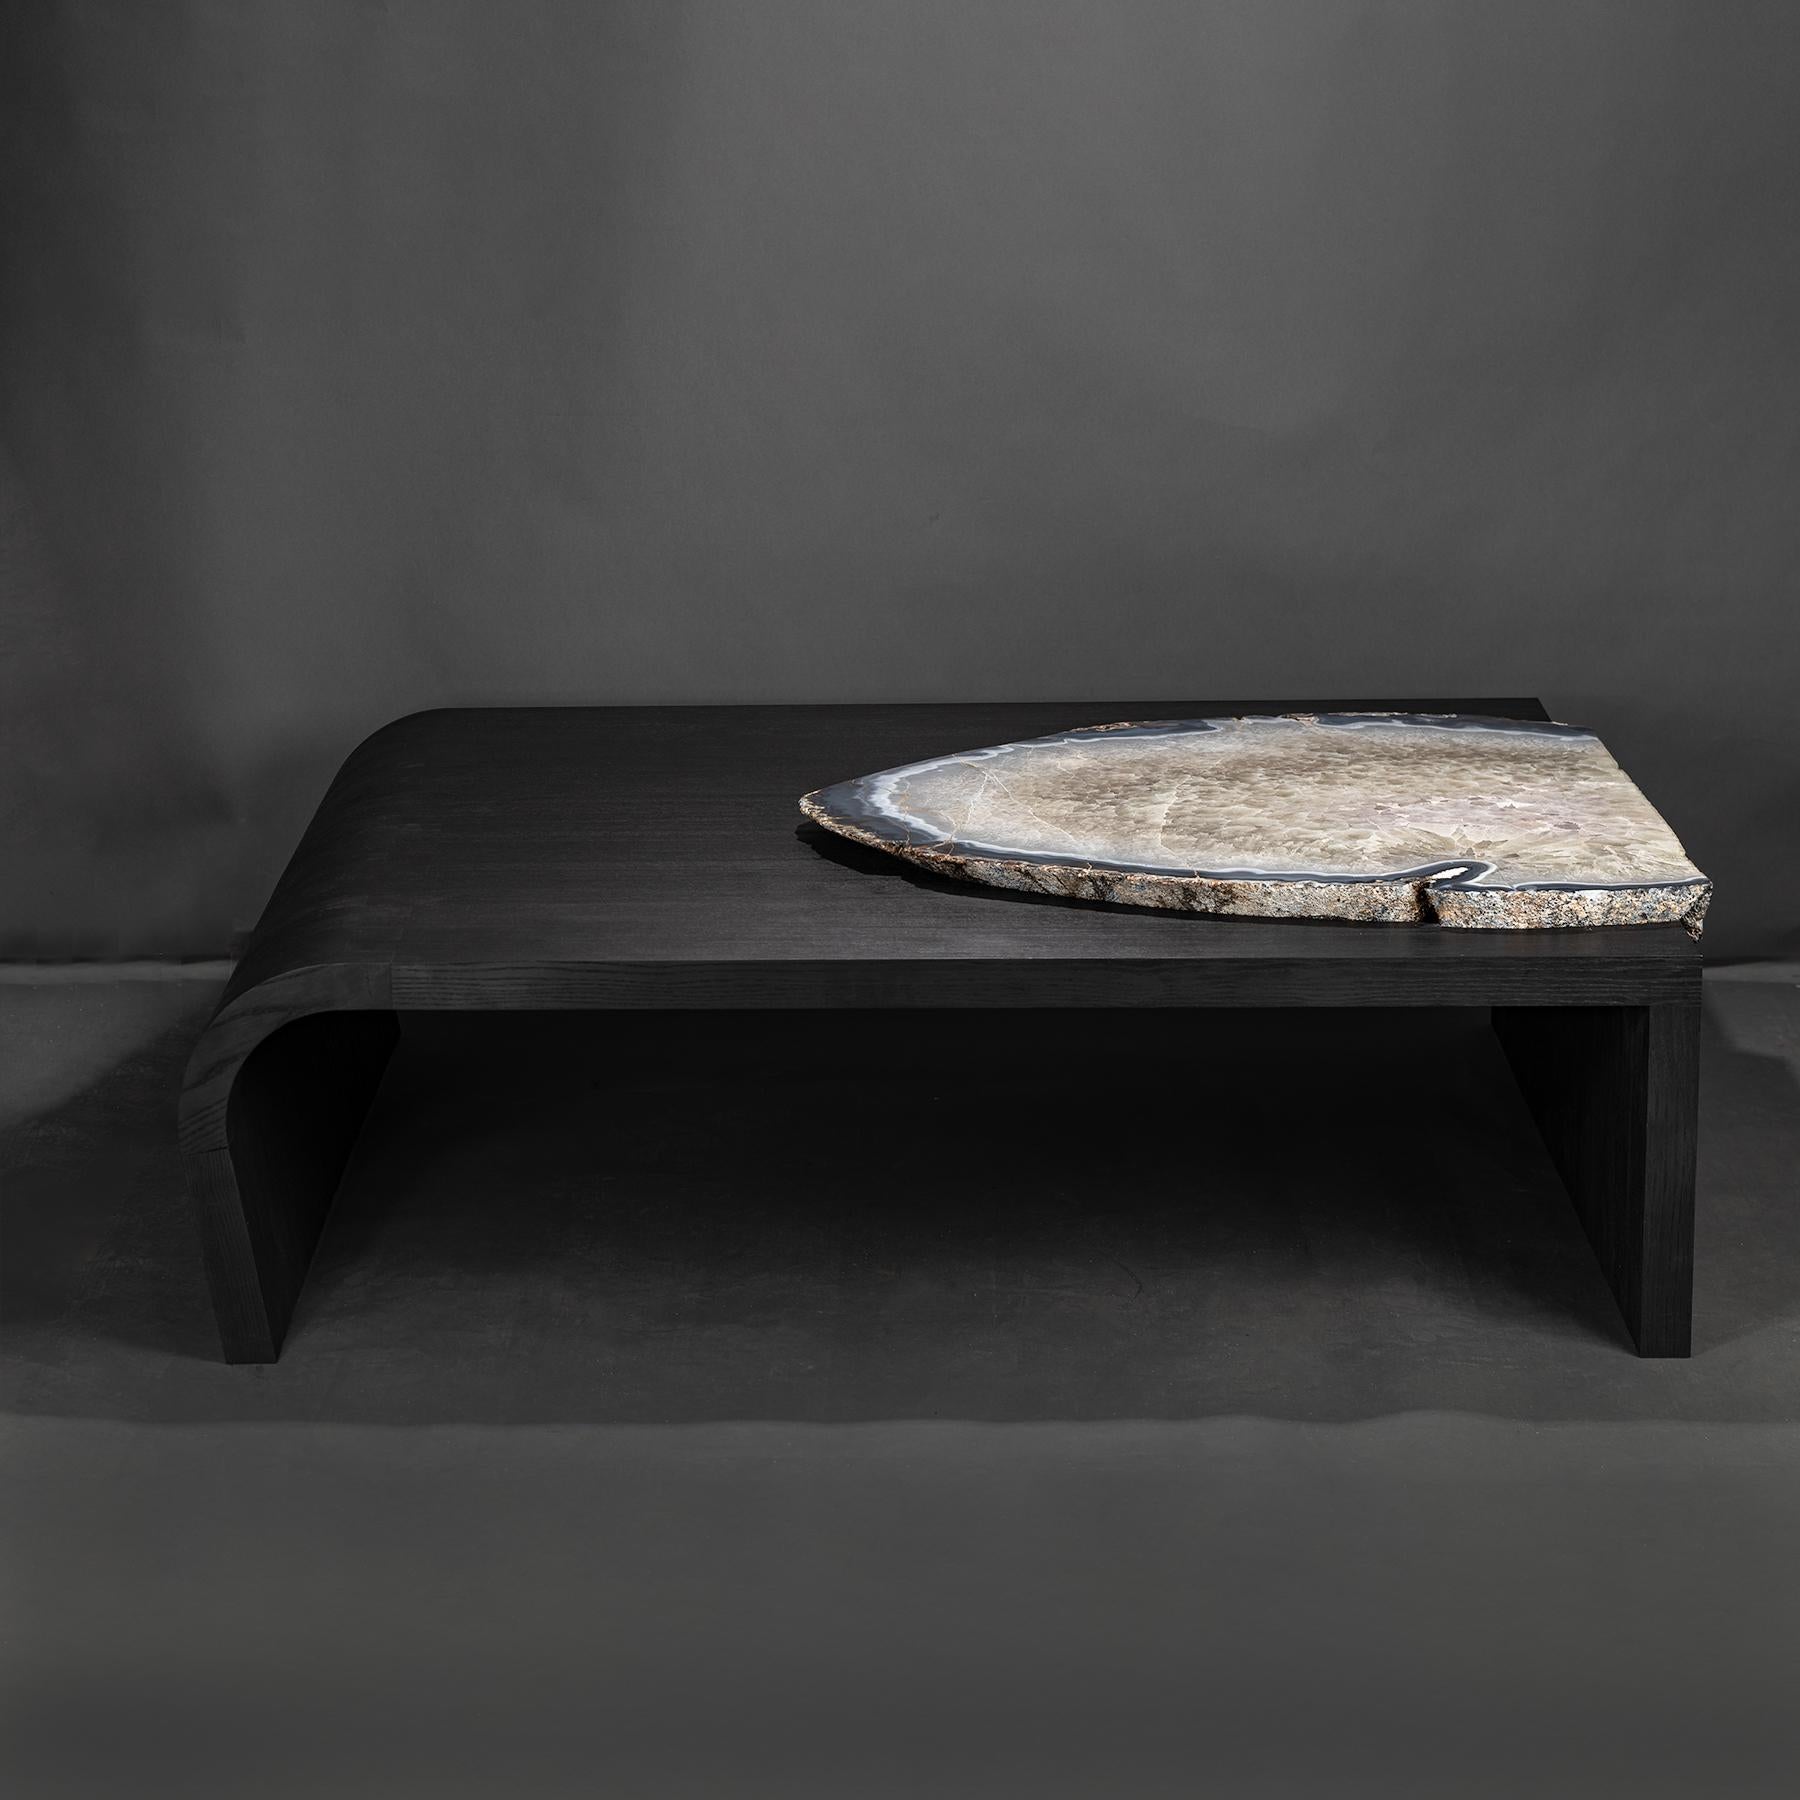 Mexican Center Table Shou Sugi Ban 'Burned' American Solid Ashwood with Agate Slab